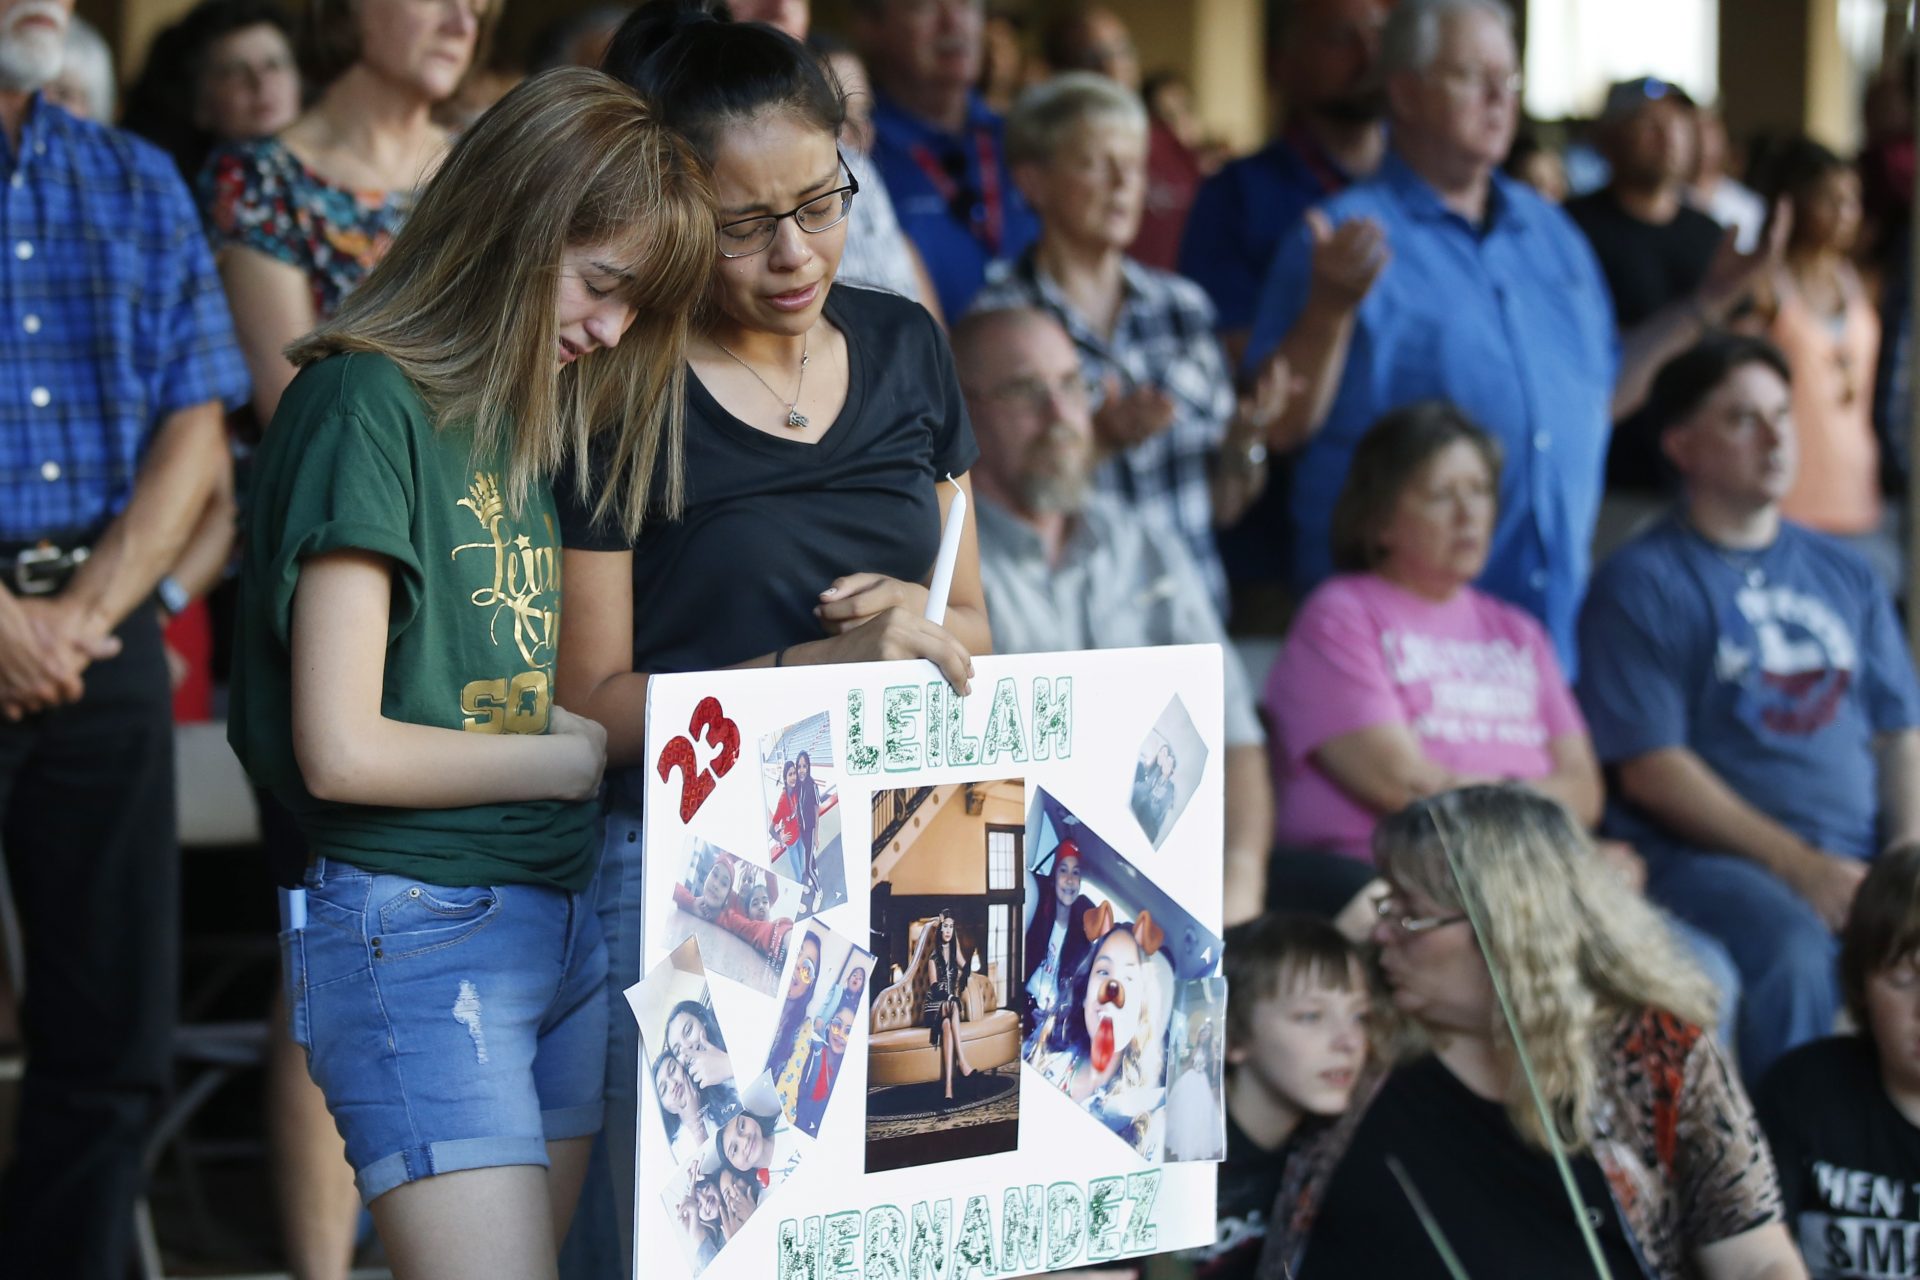 High School students Celeste Lujan, left, and Yasmin Natera, right, mourn their friend, Leila Hernandez, one of the victims of the Saturday shooting in Odessa, at a memorial service Sunday, Sept. 1, 2019, in Odessa, Texas. 